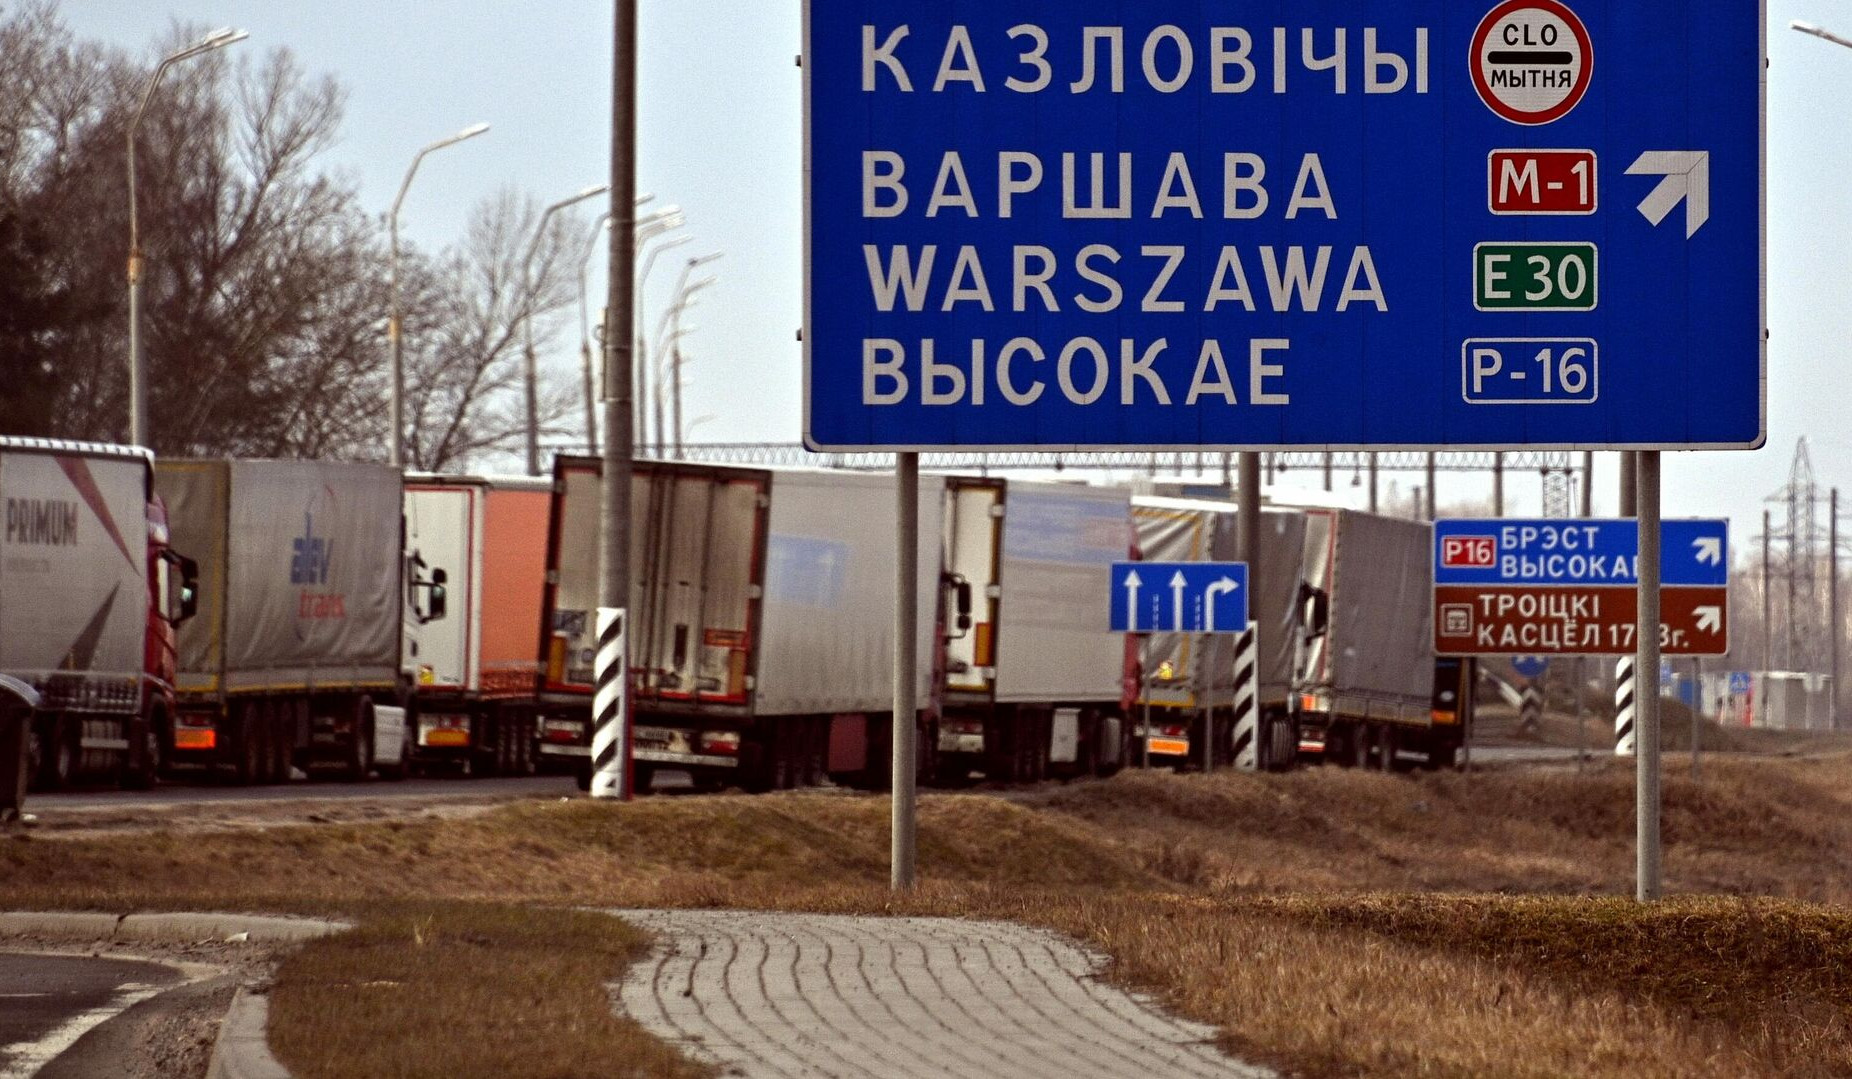 Poland may close border traffic with Belarus due to the security concerns